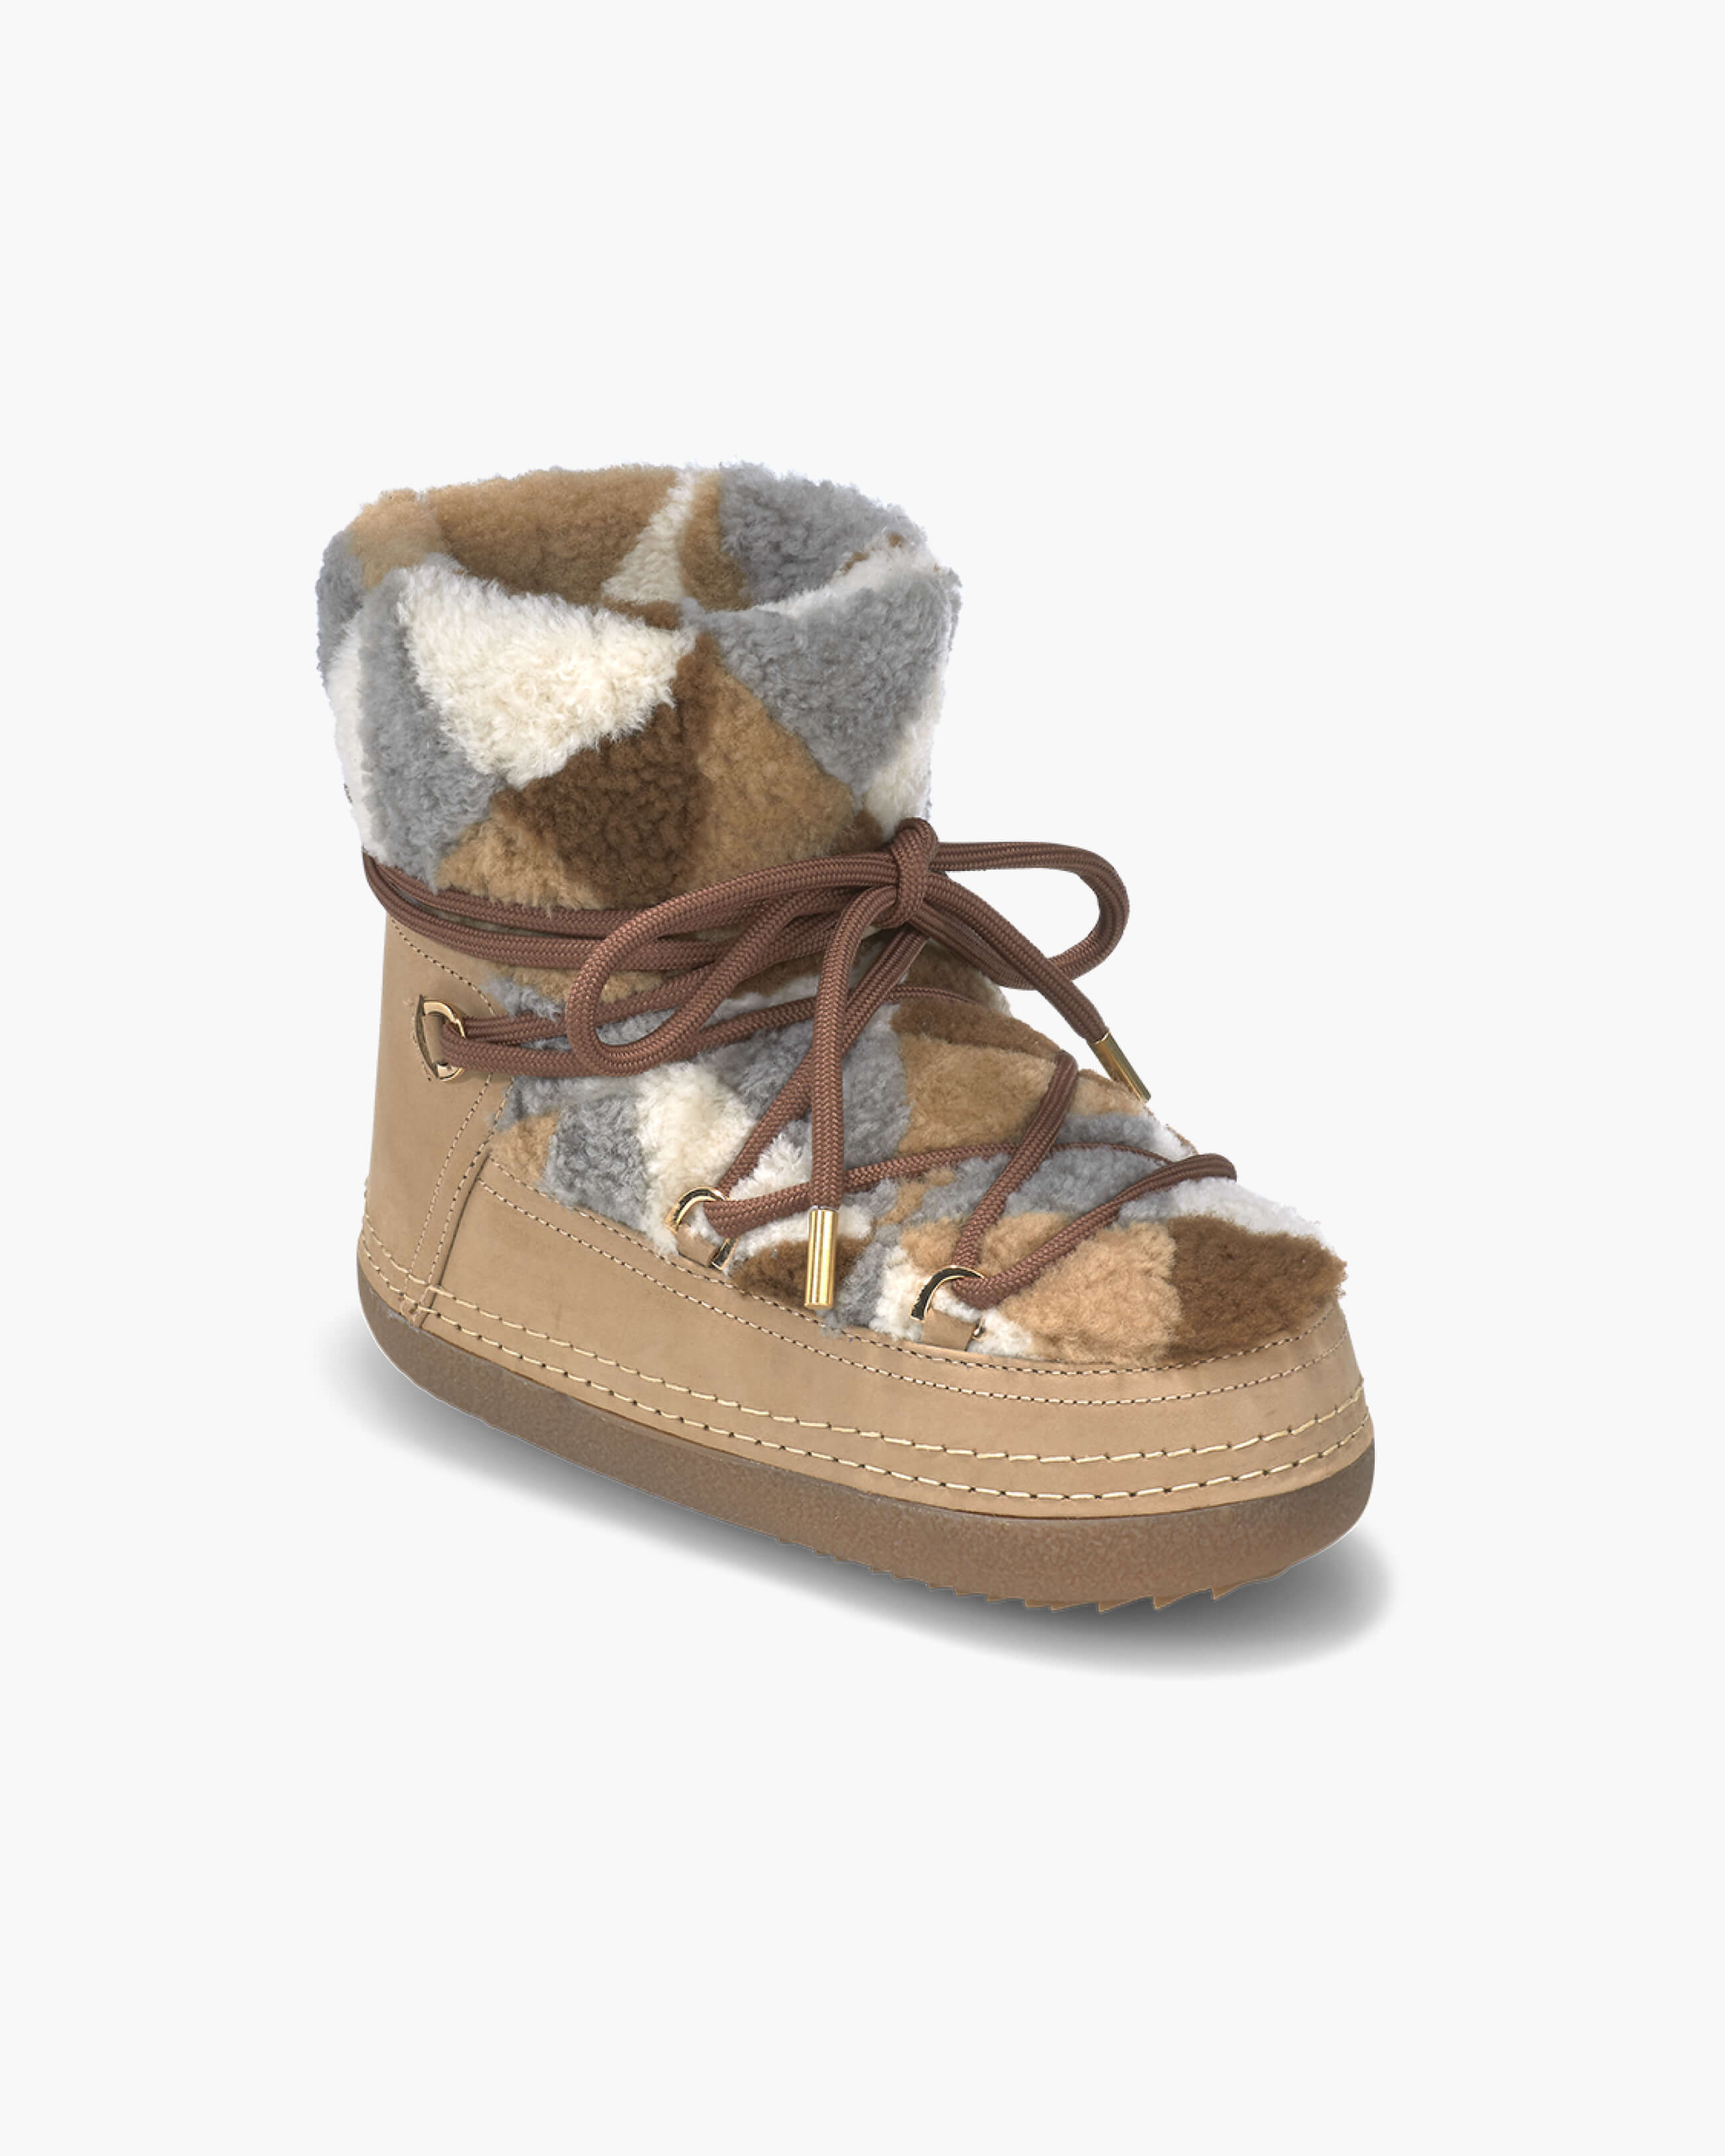 Shearling Patchwork Boot